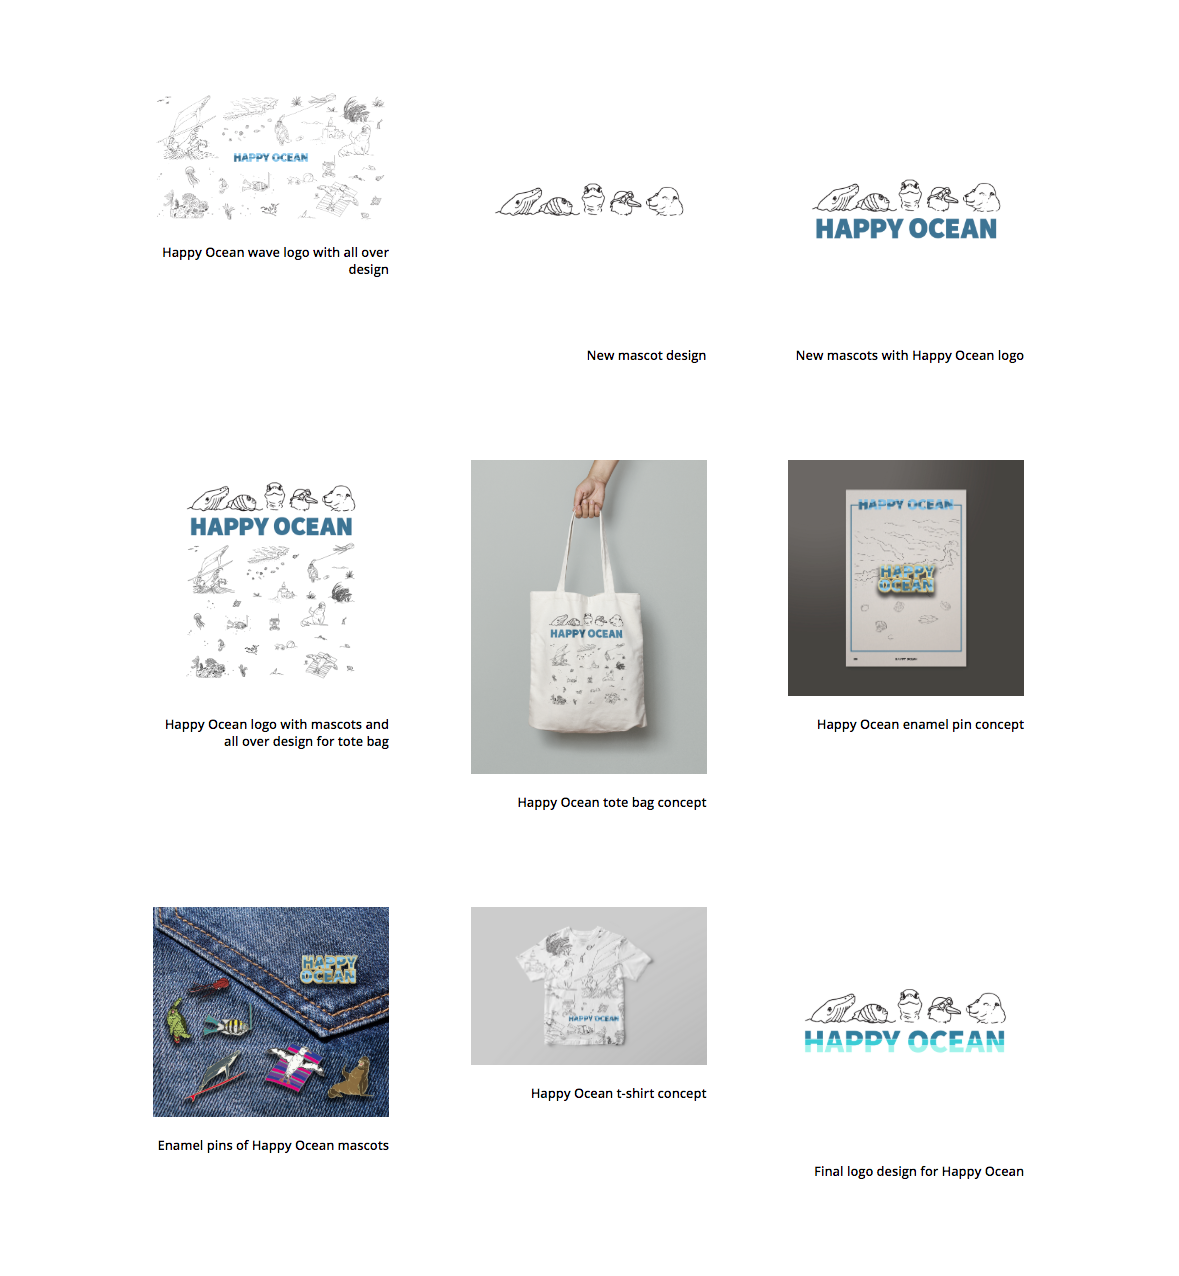 Happy Ocean logo on products such as tote bags, books, and pins. 